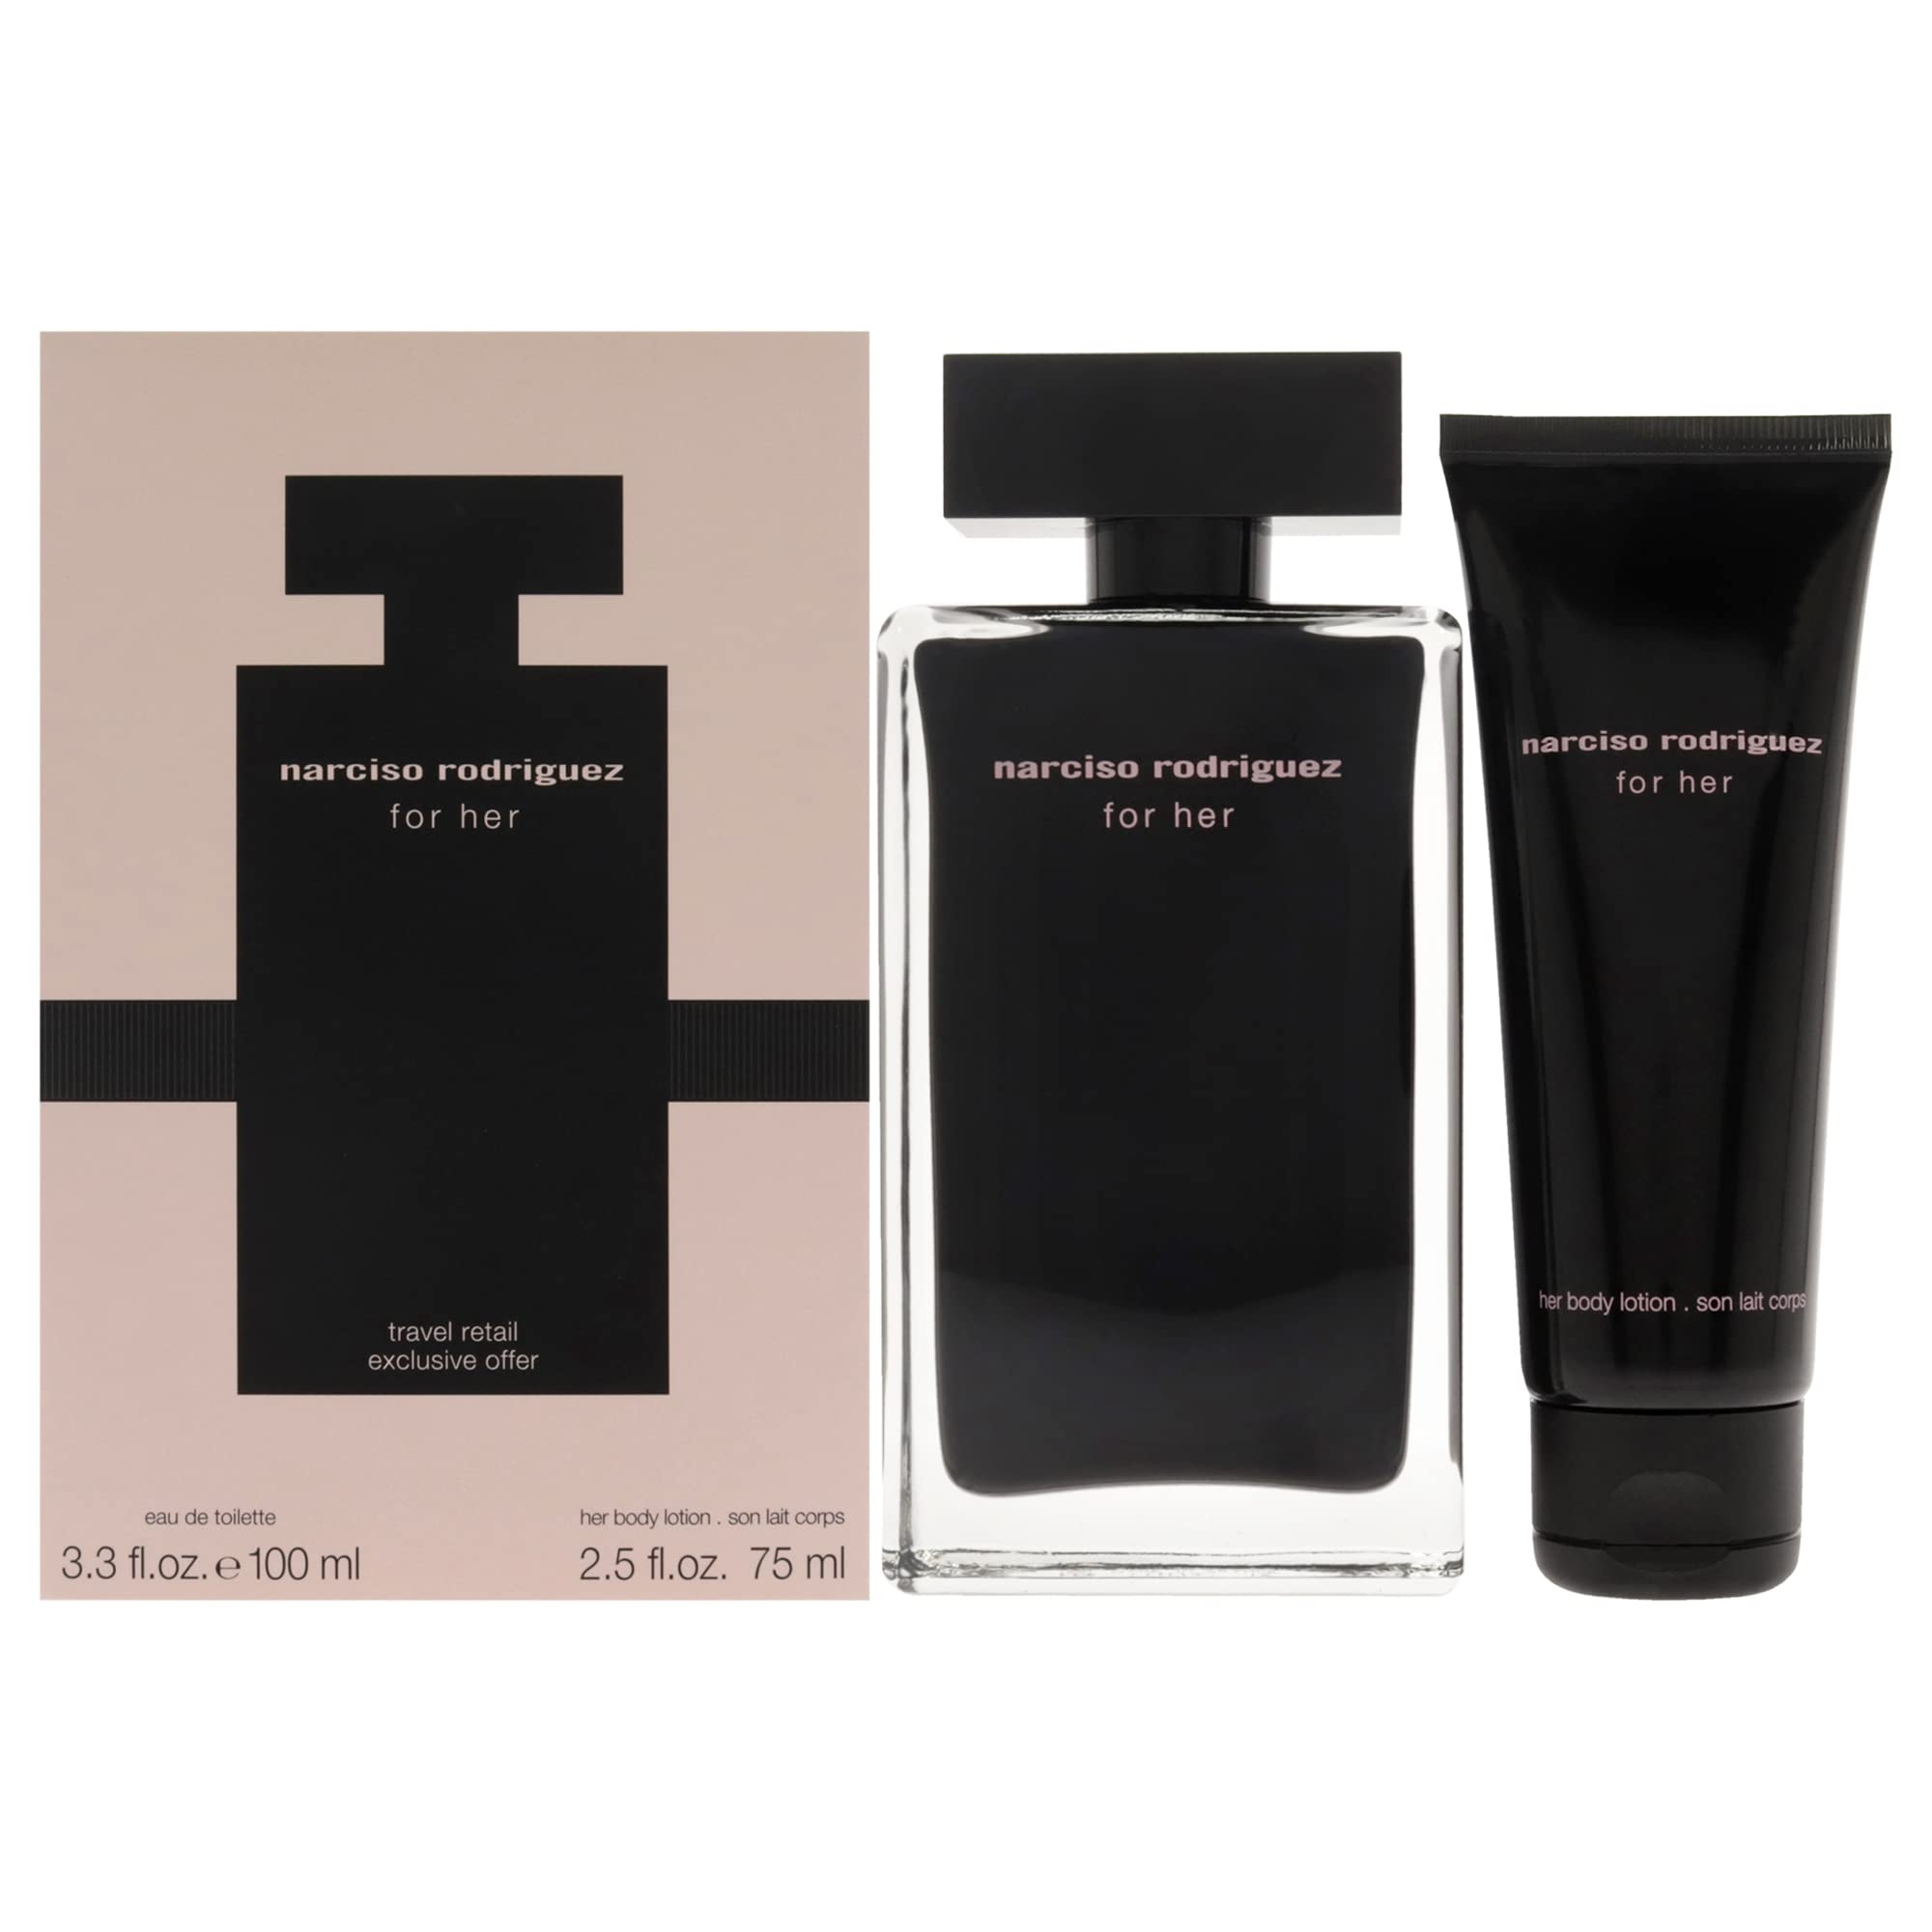 Narciso Rodriguez 2 Piece Gift Set for Women